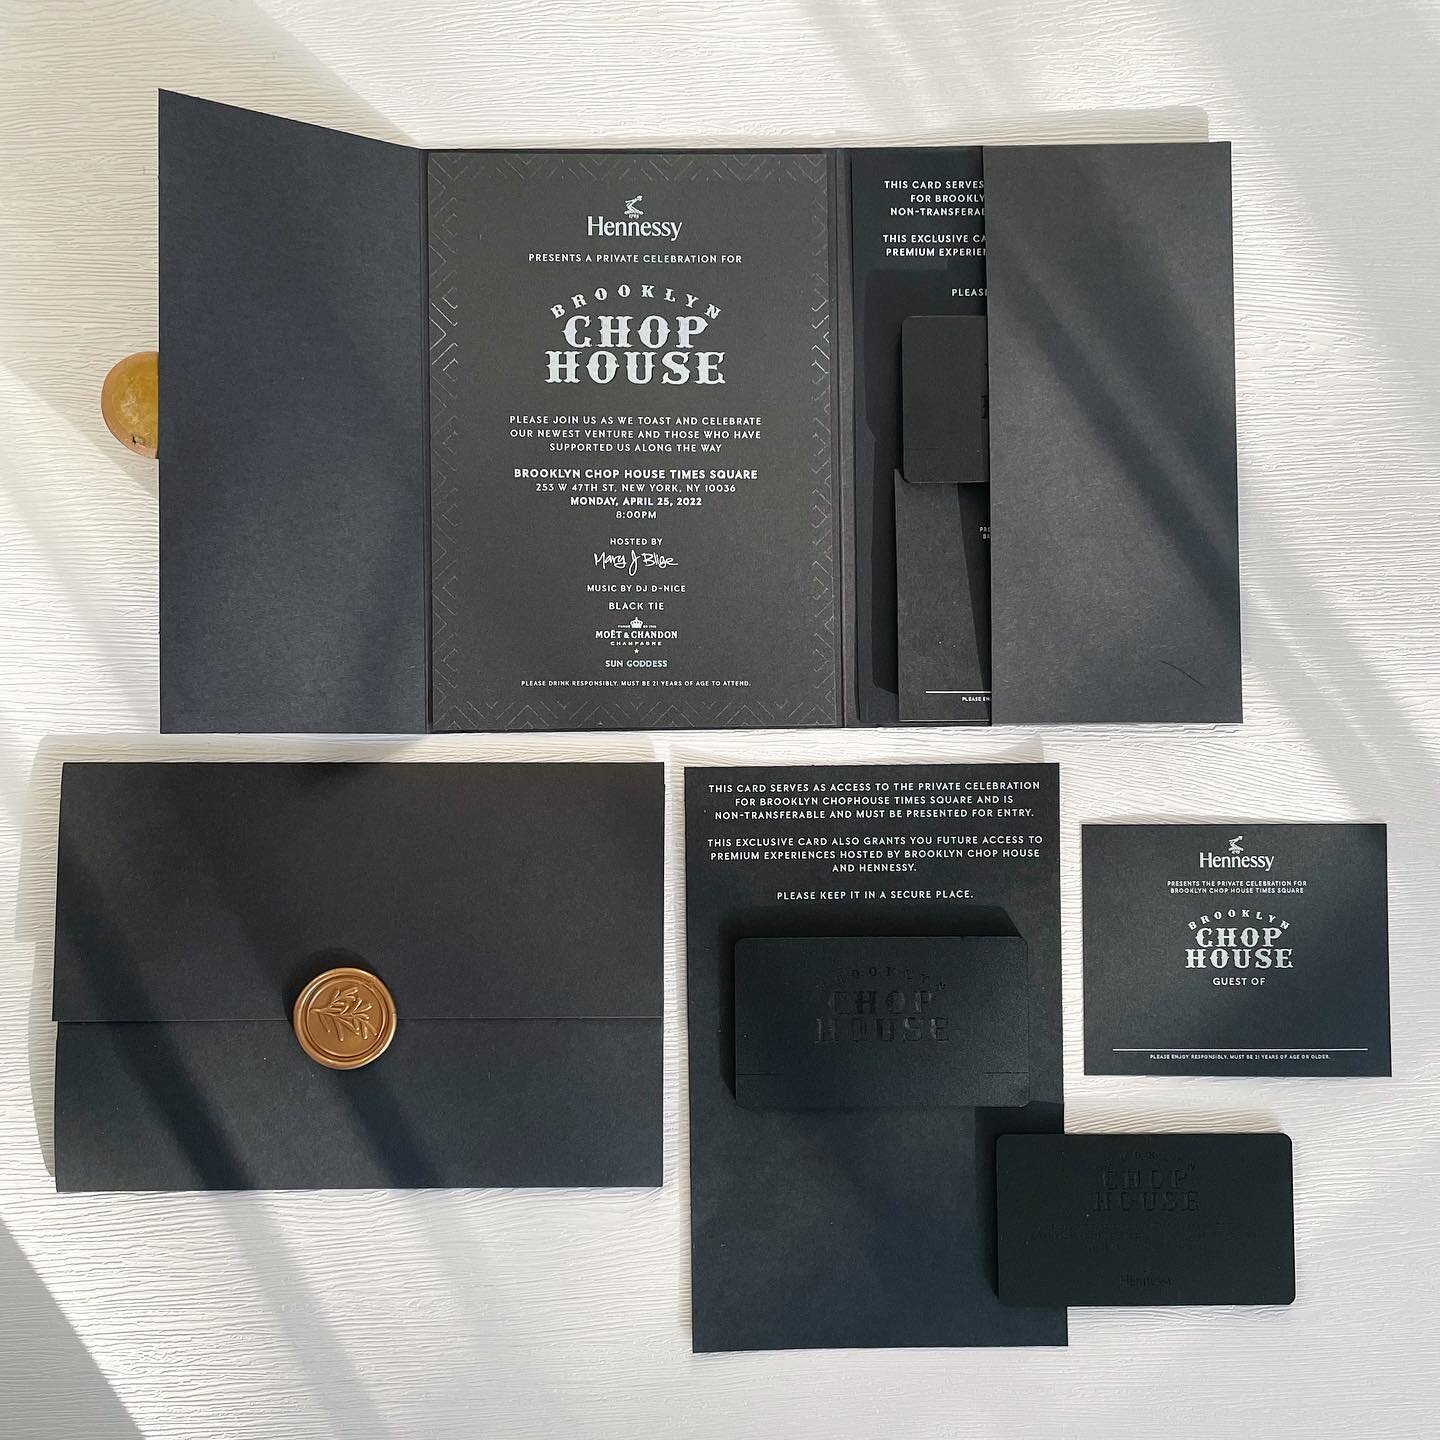 Zoom in for the details of this invitation suite that I designed and produced last year.
&bull;
#eventbranding #invitationsuite #custominvitation #hennesy #brooklynchophouse #brooklynchophousetimessquare #sungoddesswines #maryjblige #acrylicinvitatio